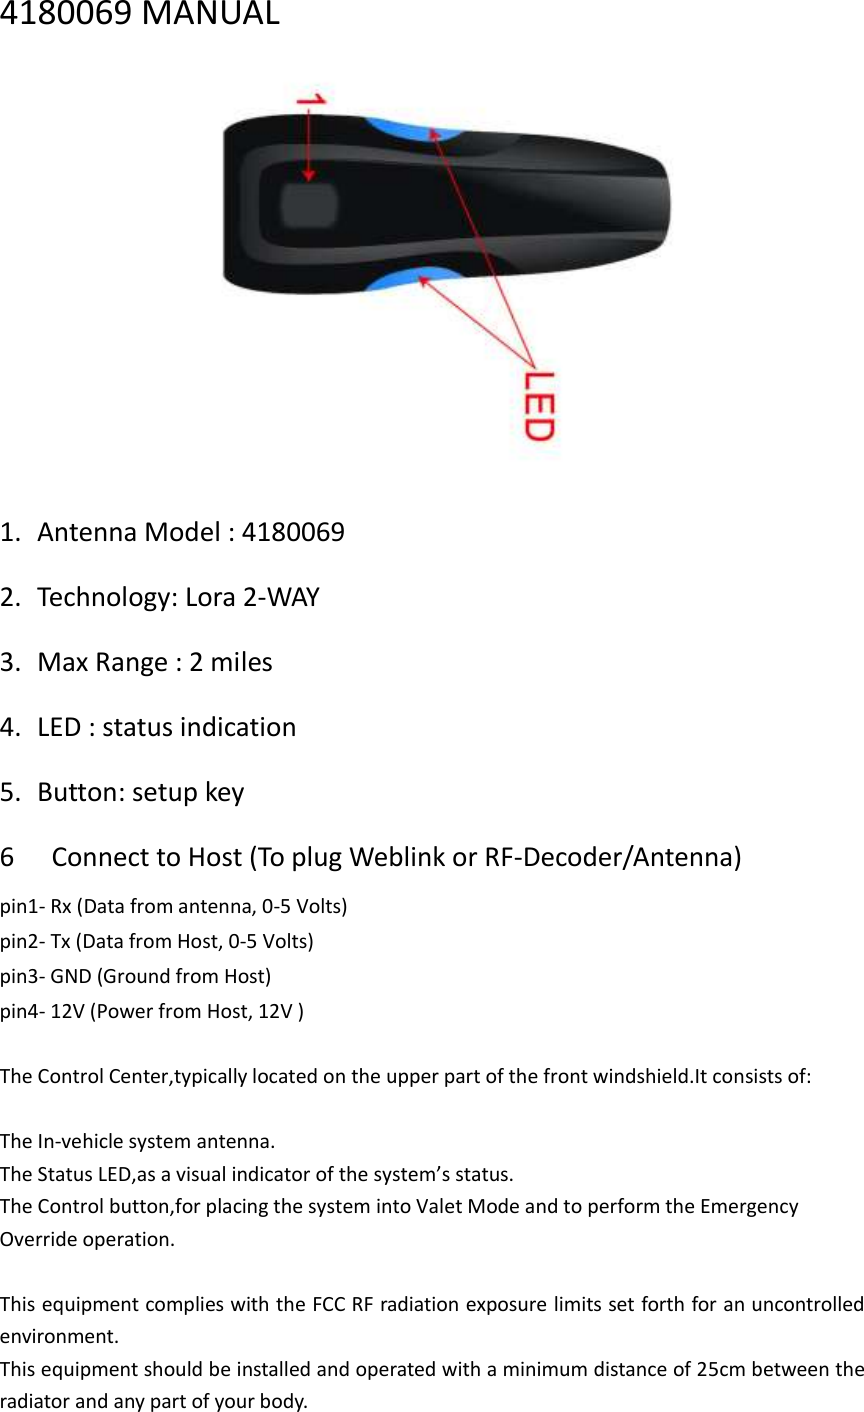 4180069 MANUAL  1. Antenna Model : 4180069 2. Technology: Lora 2-WAY 3. Max Range : 2 miles 4. LED : status indication 5. Button: setup key 6   Connect to Host (To plug Weblink or RF-Decoder/Antenna)   pin1- Rx (Data from antenna, 0-5 Volts)   pin2- Tx (Data from Host, 0-5 Volts)   pin3- GND (Ground from Host)   pin4- 12V (Power from Host, 12V )    The Control Center,typically located on the upper part of the front windshield.It consists of:  The In-vehicle system antenna. The Status LED,as a visual indicator of the system’s status. The Control button,for placing the system into Valet Mode and to perform the Emergency Override operation.  This equipment complies with the FCC RF radiation exposure limits set forth for an uncontrolled environment.   This equipment should be installed and operated with a minimum distance of 25cm between the radiator and any part of your body. 